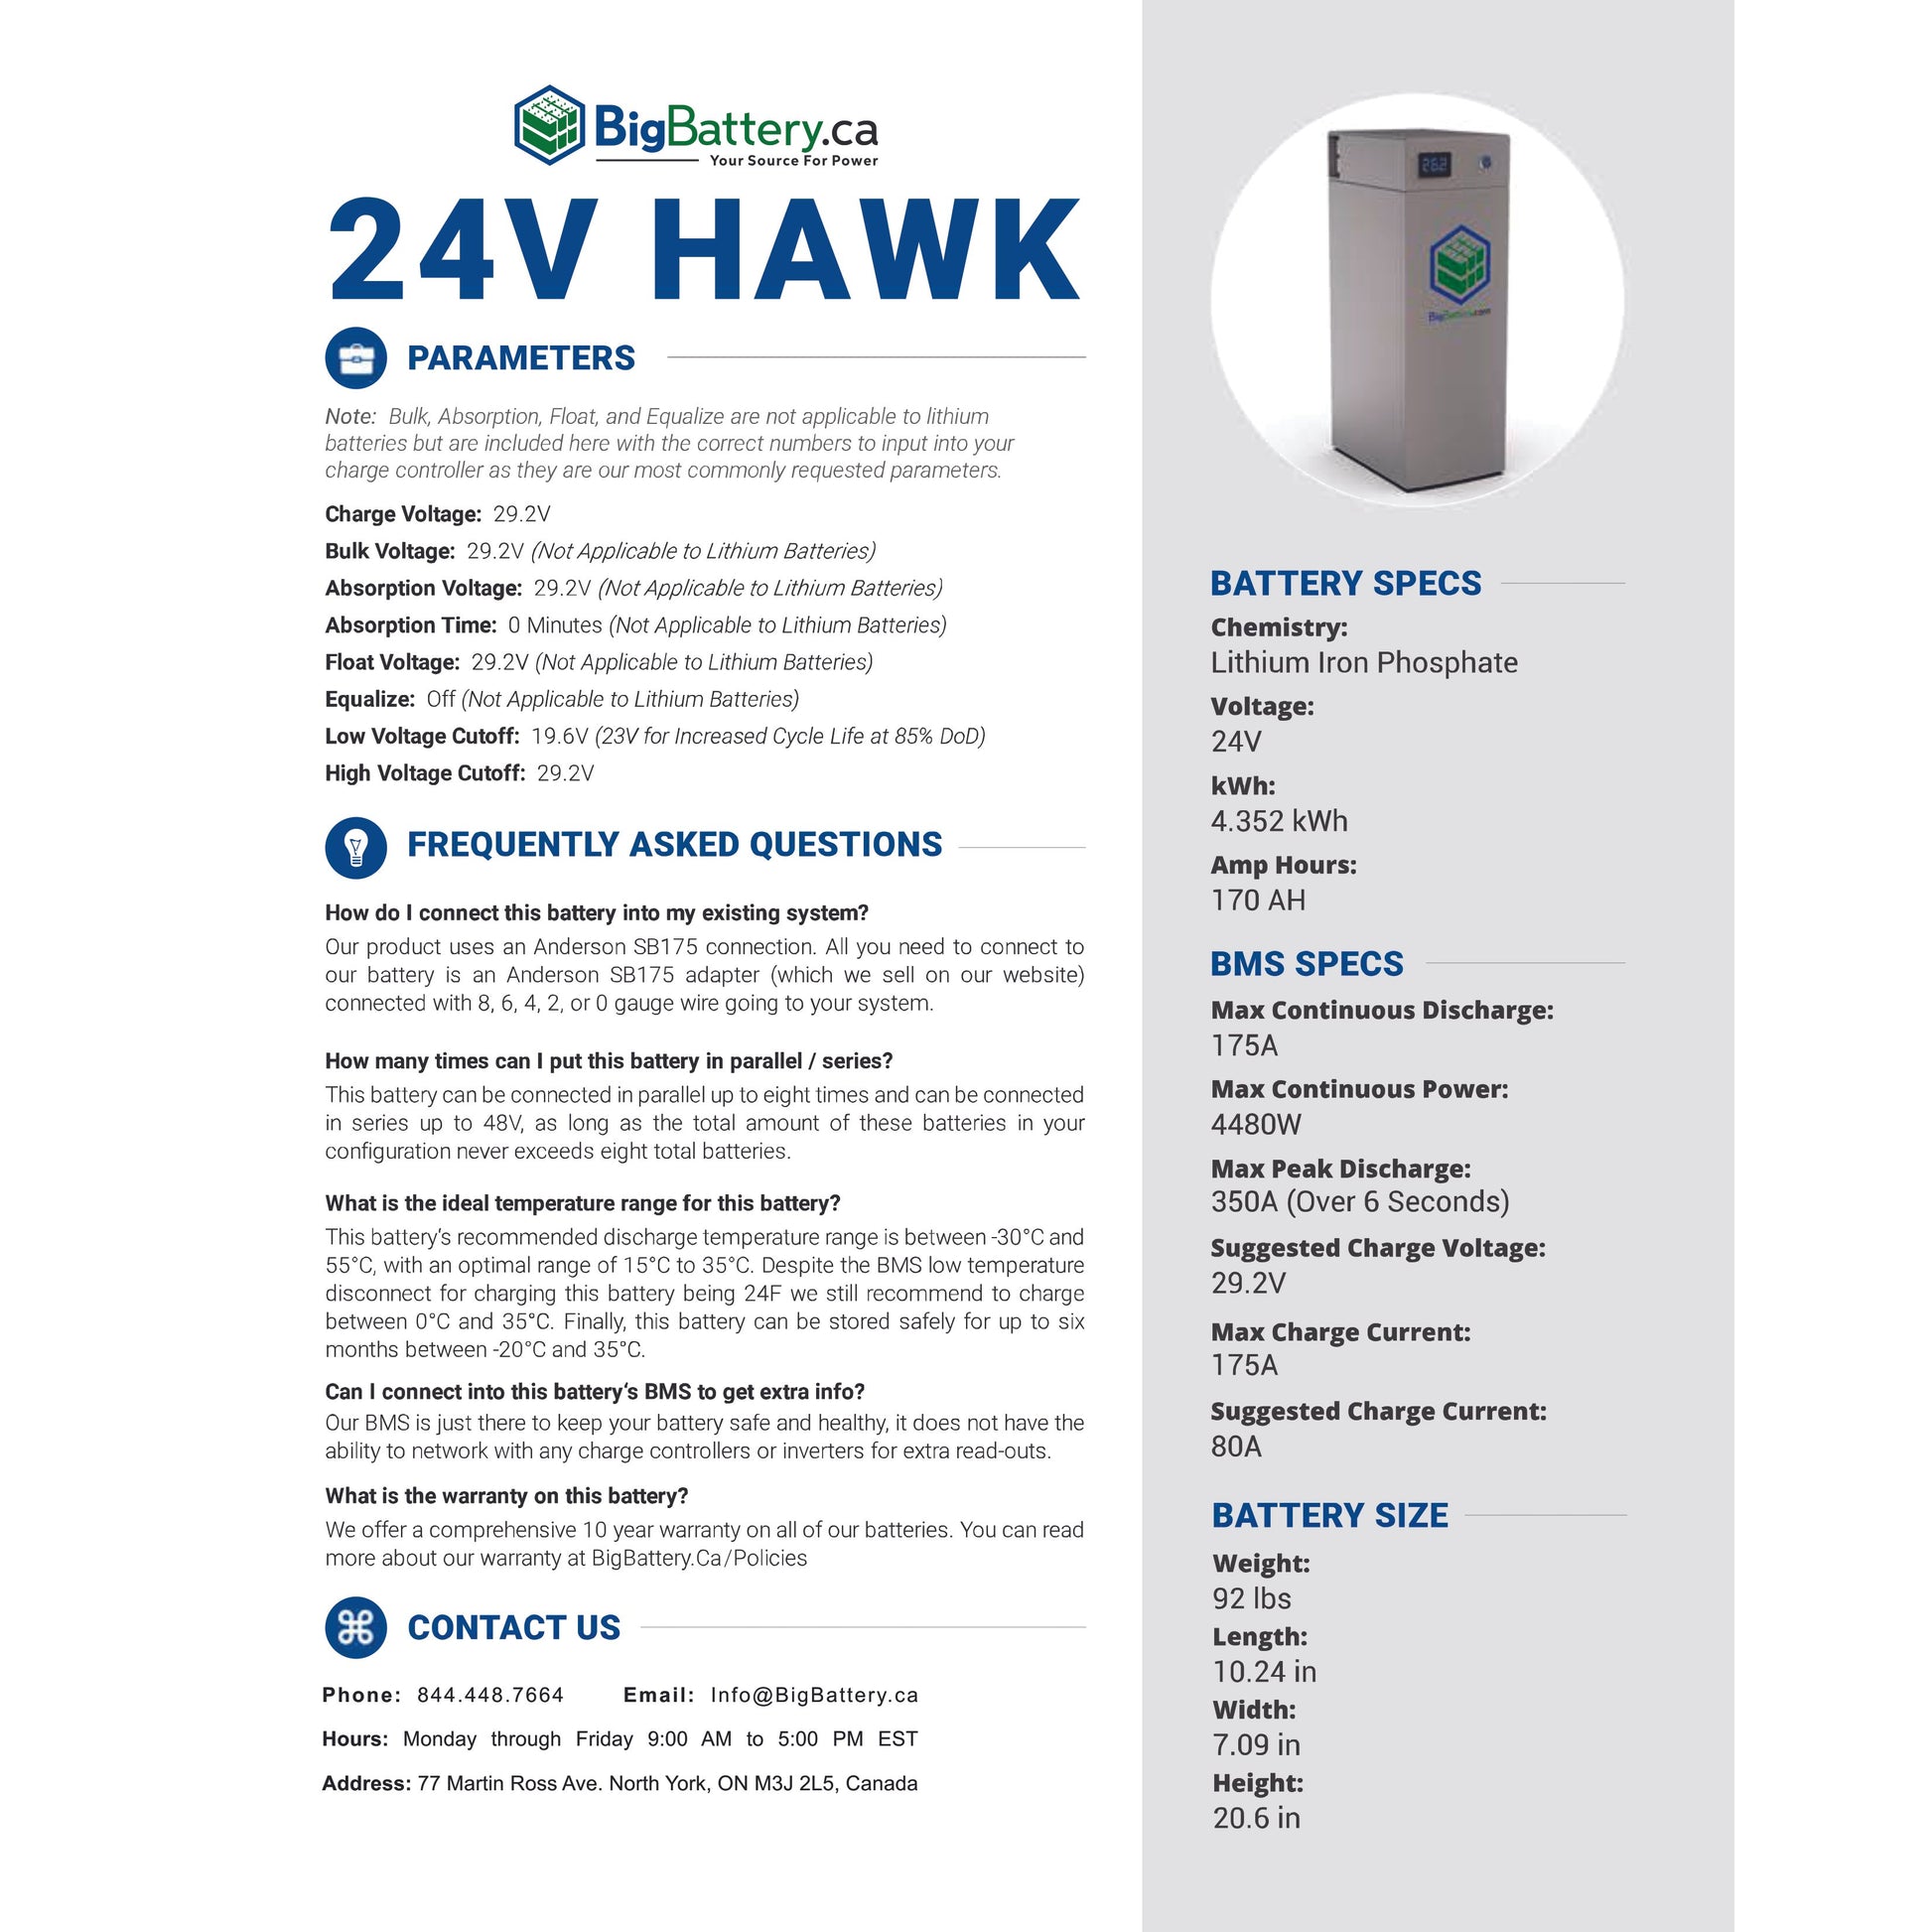 24V HAWK｜170AH｜4.3KWH｜LIFEPO4 Power Block｜Lithium Battery Pack | Currently On Backorder